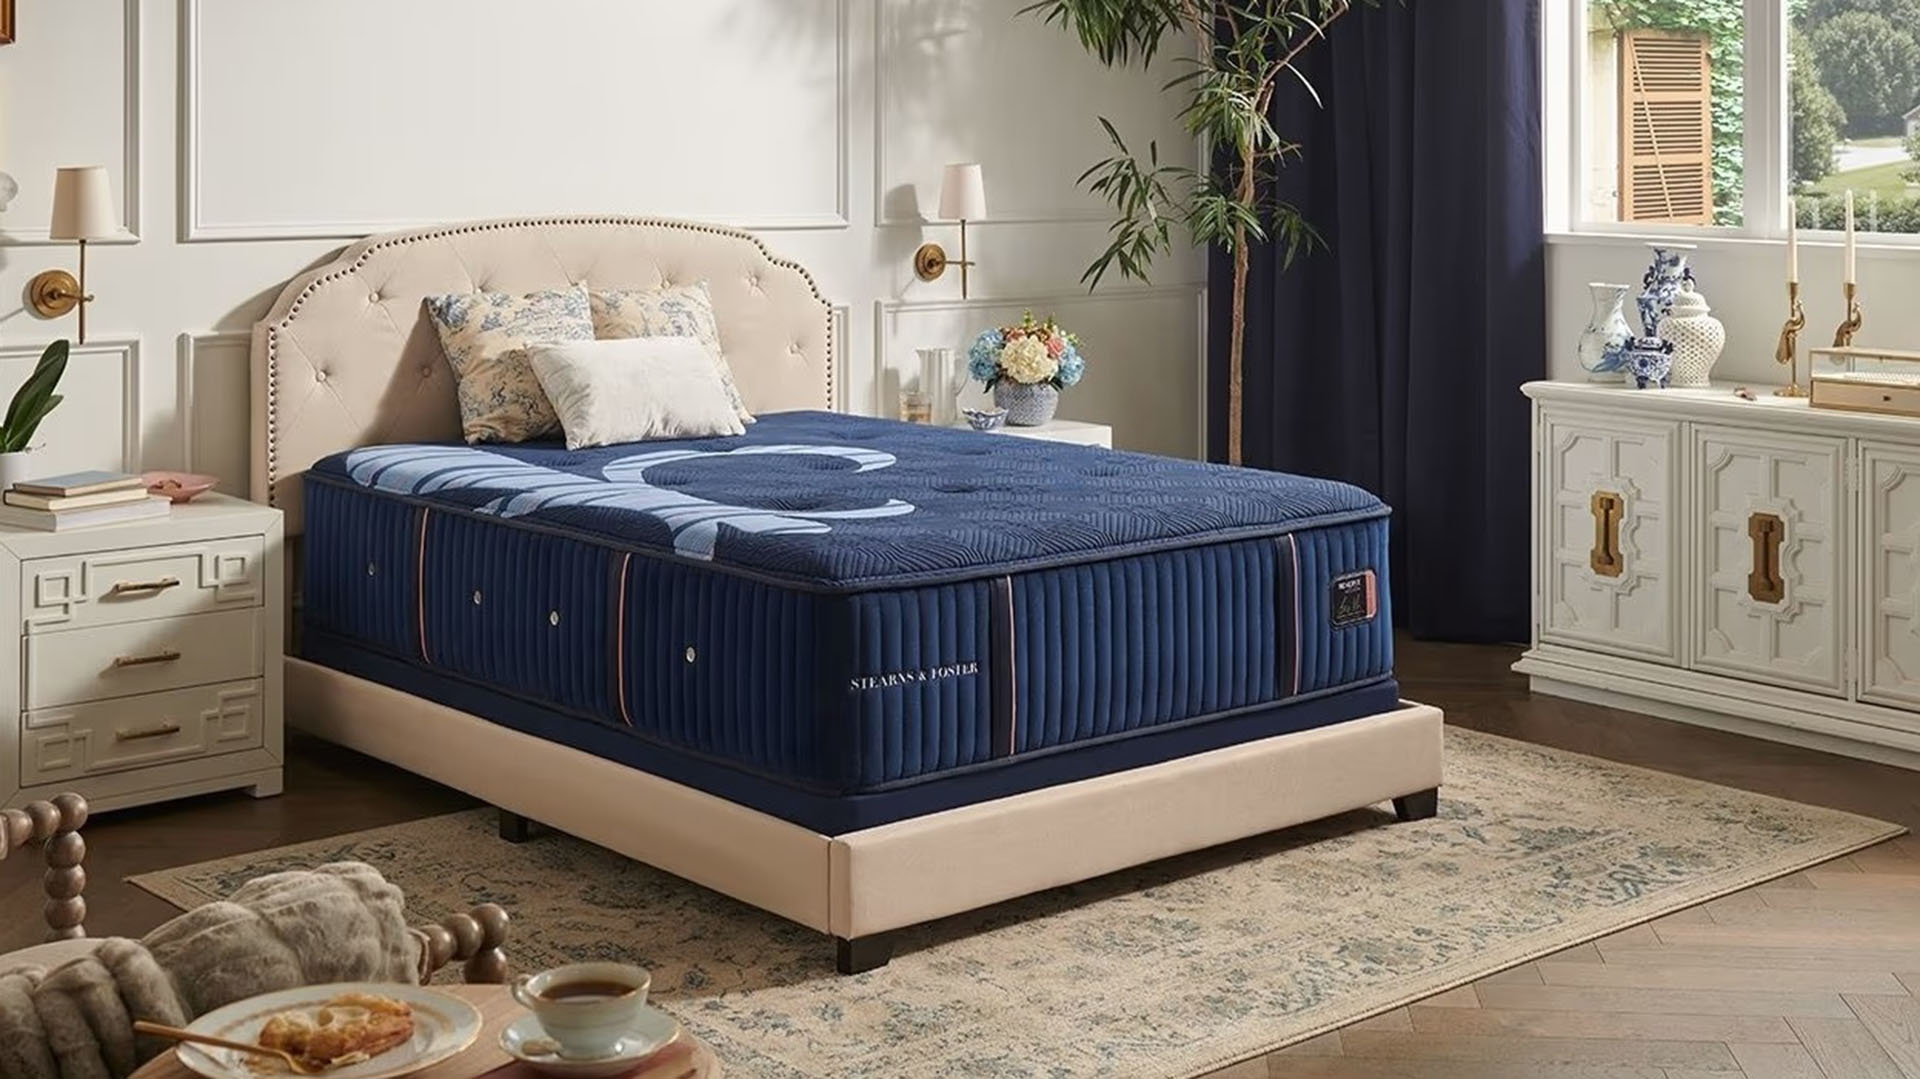 Stearns & Foster mattresses in Irving are designed with comfort and support in mind.